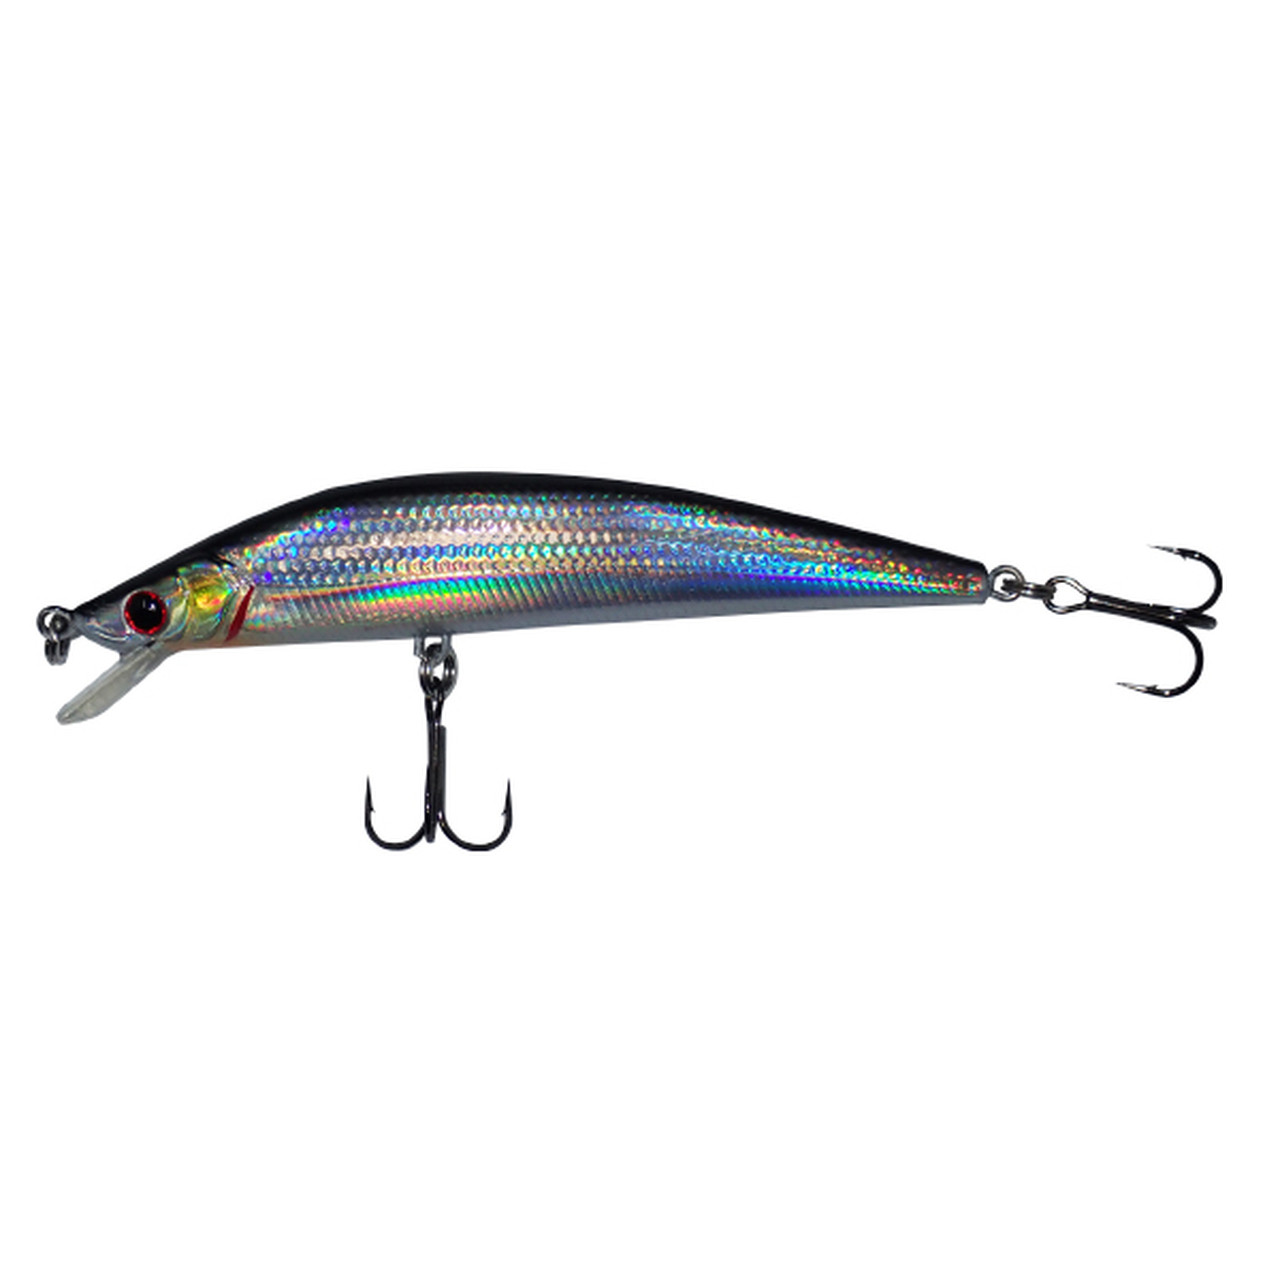 SteelShad Floater Diver Series Fishing Lure - Classic - 1/2 oz